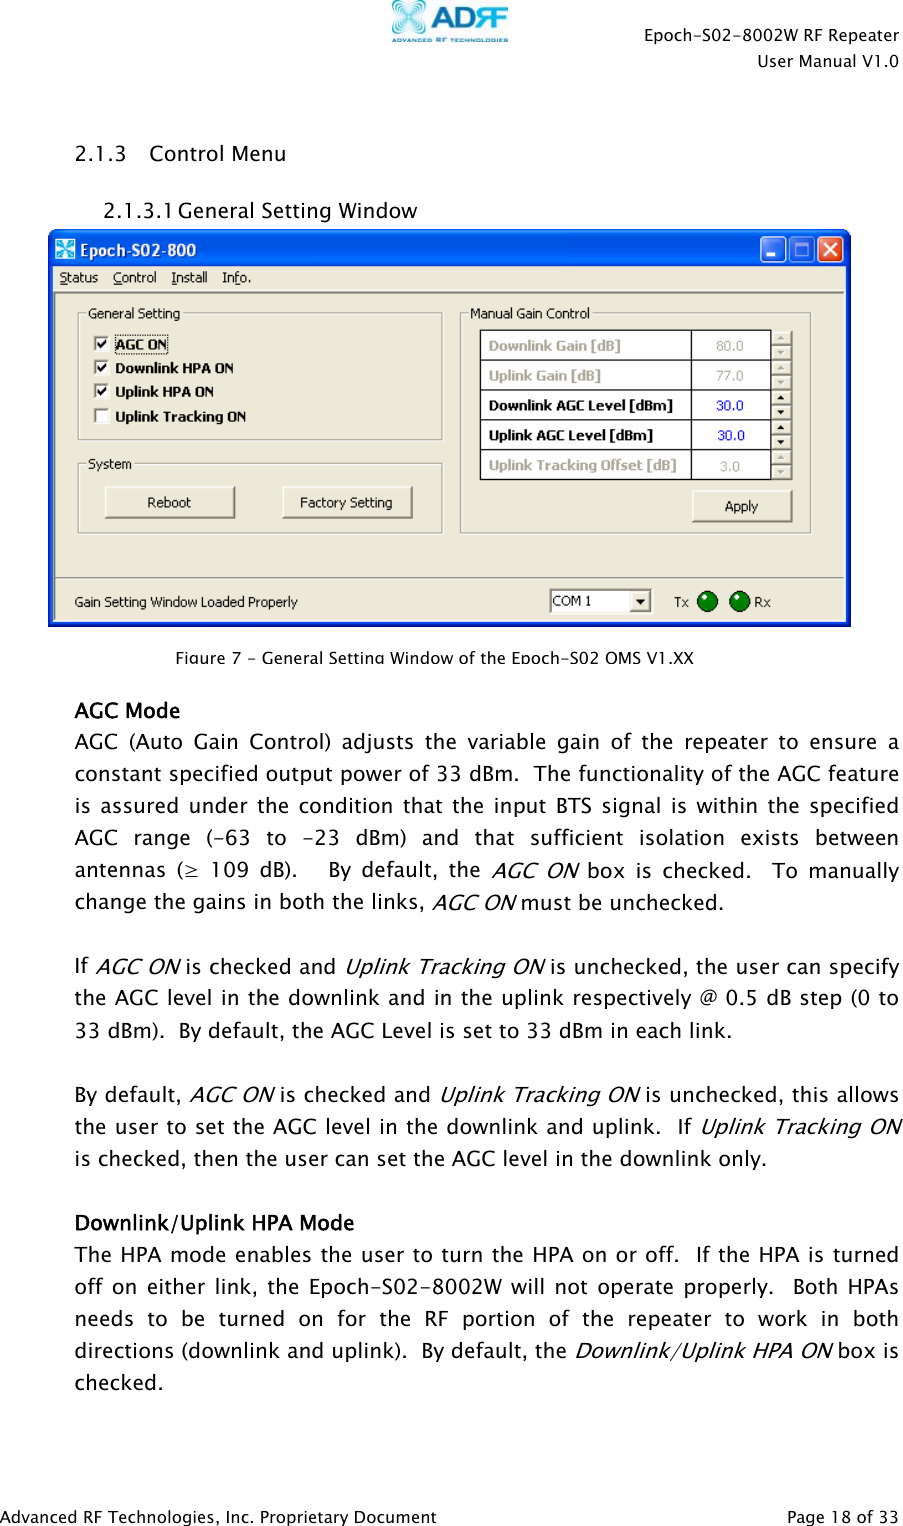    Epoch-S02-8002W RF Repeater  User Manual V1.0  Advanced RF Technologies, Inc. Proprietary Document   Page 18 of 33   2.1.3 Control Menu 2.1.3.1 General Setting Window    AGC Mode AGC (Auto Gain Control) adjusts the variable gain of the repeater to ensure a constant specified output power of 33 dBm.  The functionality of the AGC feature is assured under the condition that the input BTS signal is within the specified AGC range (-63 to -23 dBm) and that sufficient isolation exists between antennas (≥ 109 dB).   By default, the AGC ON box is checked.  To manually change the gains in both the links, AGC ON must be unchecked.    If AGC ON is checked and Uplink Tracking ON is unchecked, the user can specify the AGC level in the downlink and in the uplink respectively @ 0.5 dB step (0 to 33 dBm).  By default, the AGC Level is set to 33 dBm in each link.    By default, AGC ON is checked and Uplink Tracking ON is unchecked, this allows the user to set the AGC level in the downlink and uplink.  If Uplink Tracking ON is checked, then the user can set the AGC level in the downlink only.  Downlink/Uplink HPA Mode The HPA mode enables the user to turn the HPA on or off.  If the HPA is turned off on either link, the Epoch-S02-8002W will not operate properly.  Both HPAs needs to be turned on for the RF portion of the repeater to work in both directions (downlink and uplink).  By default, the Downlink/Uplink HPA ON box is checked.  Figure7-GeneralSetting WindowoftheEpoch-S02OMS V1.XX